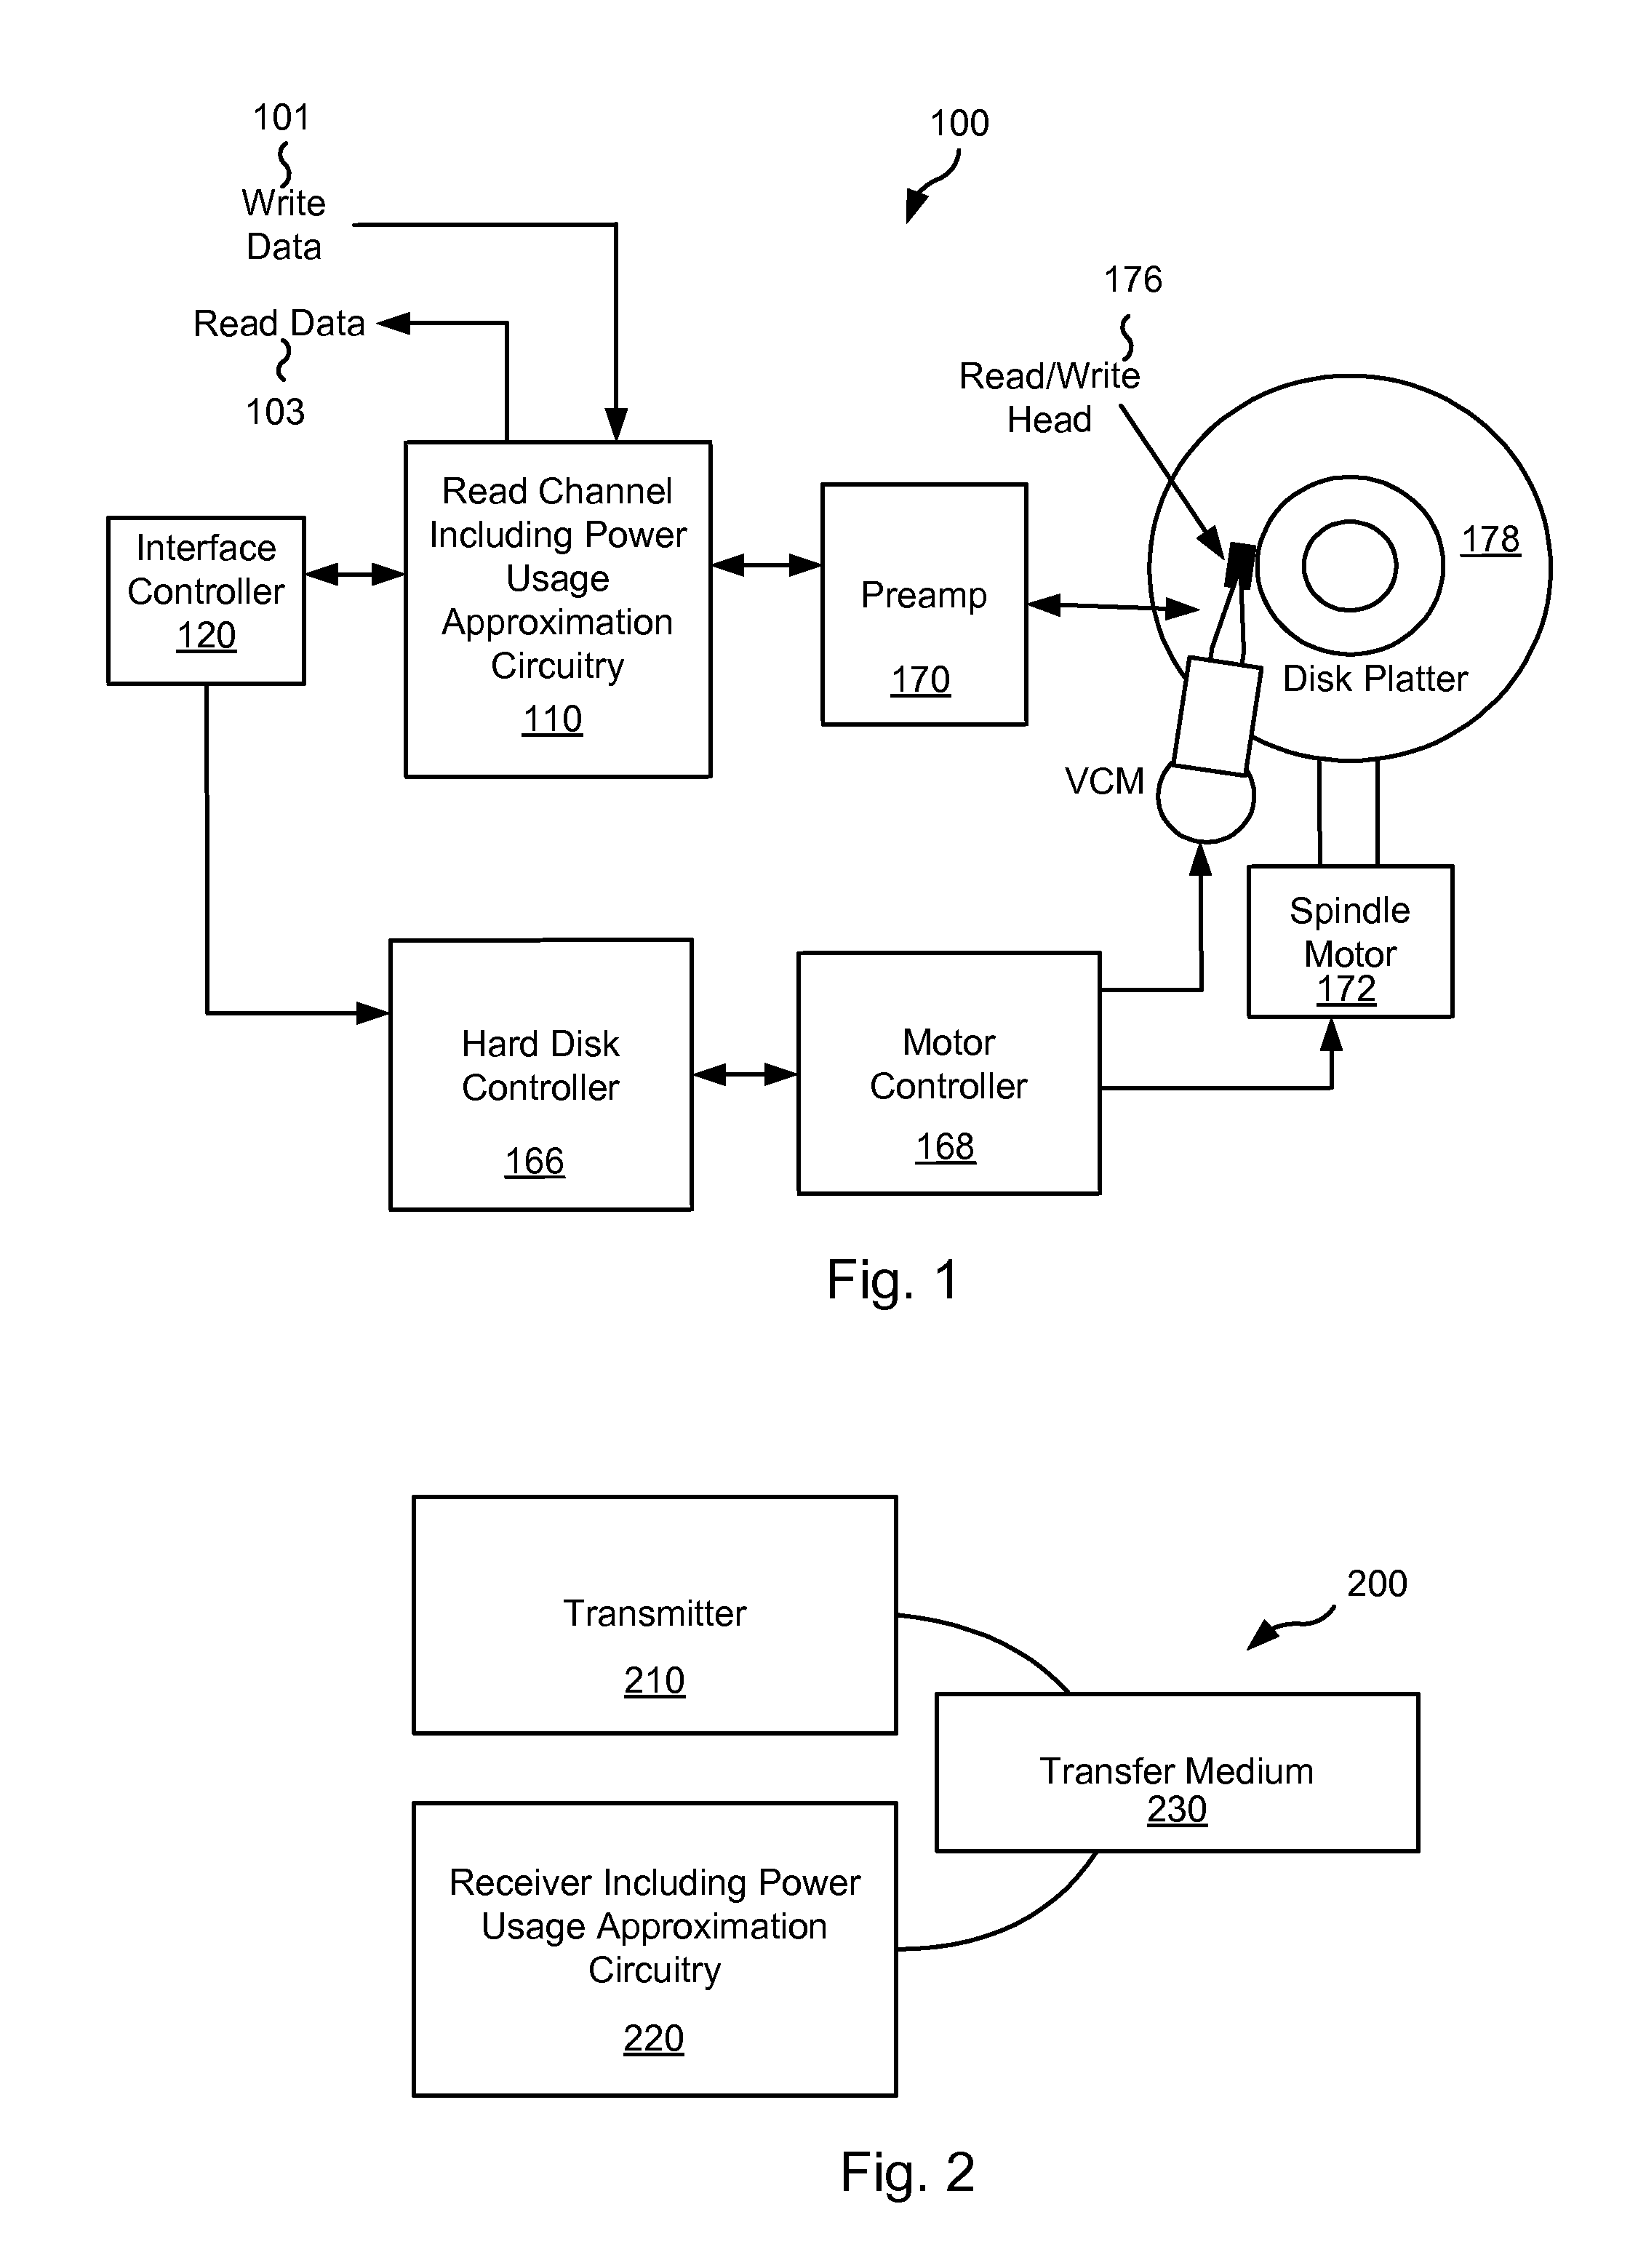 Systems and Methods for Power Measurement in a Data Processing System